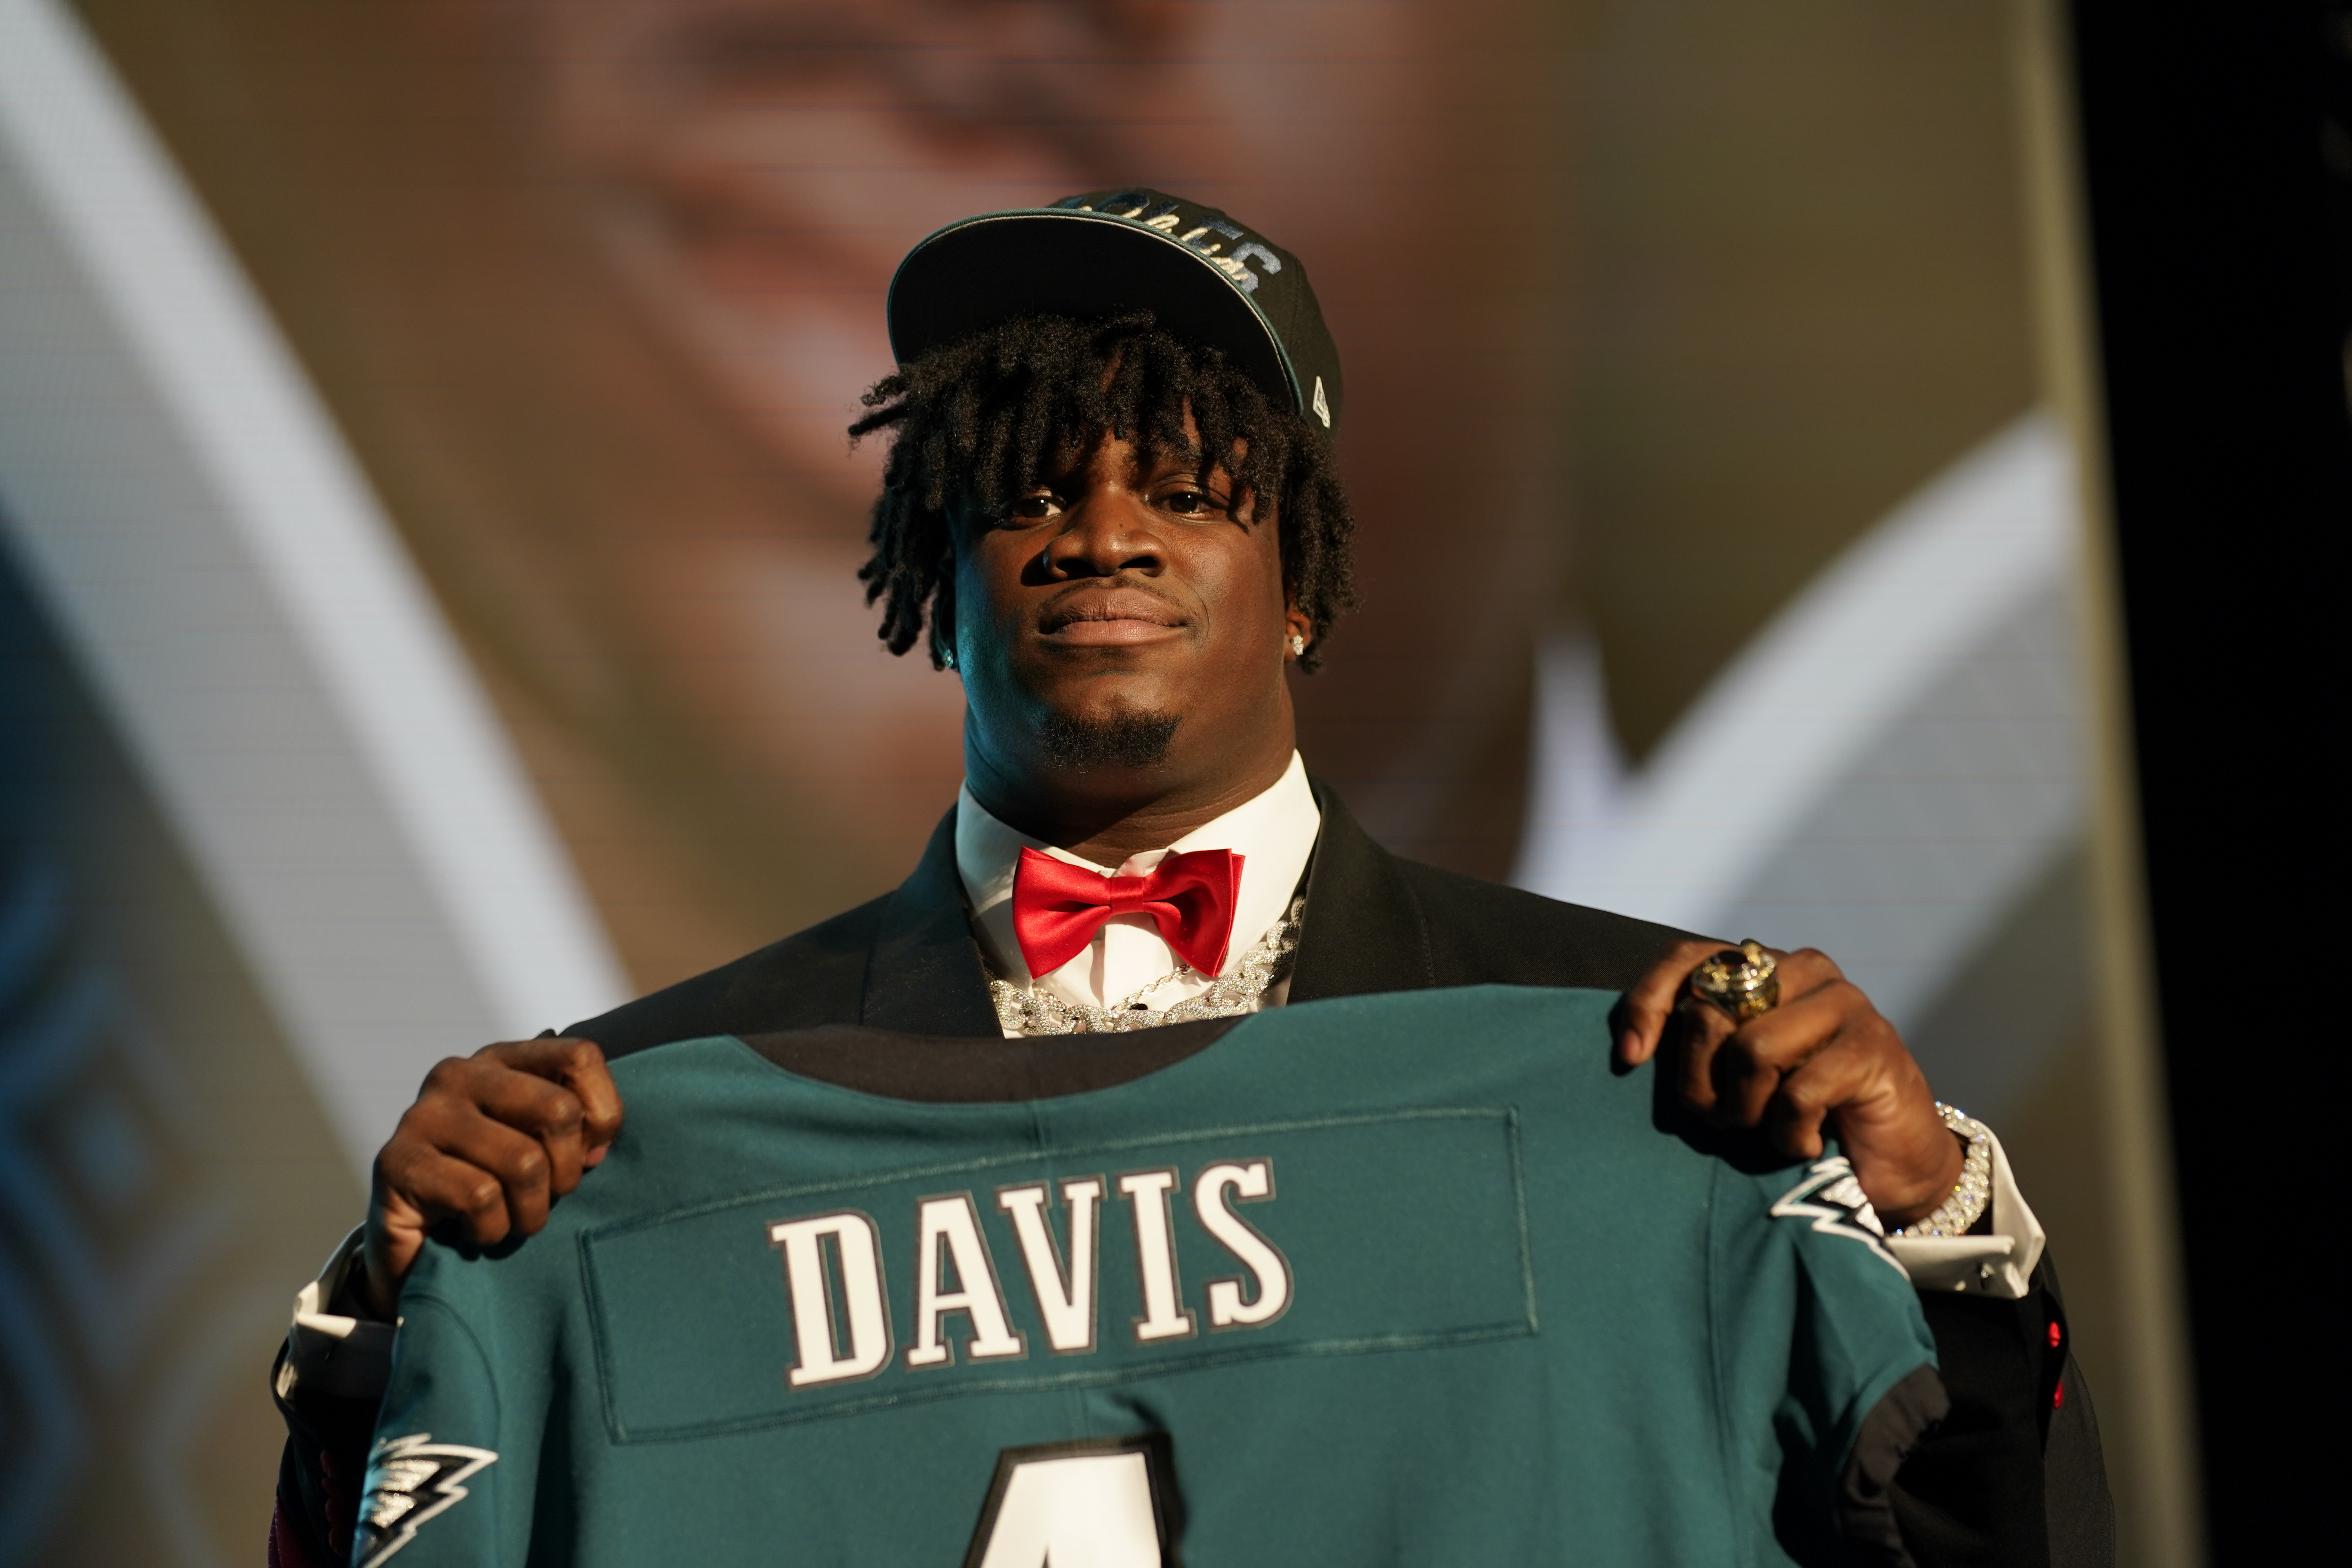 Eagles sign Jordan Davis, 2 other players ahead of rookie minicamp 